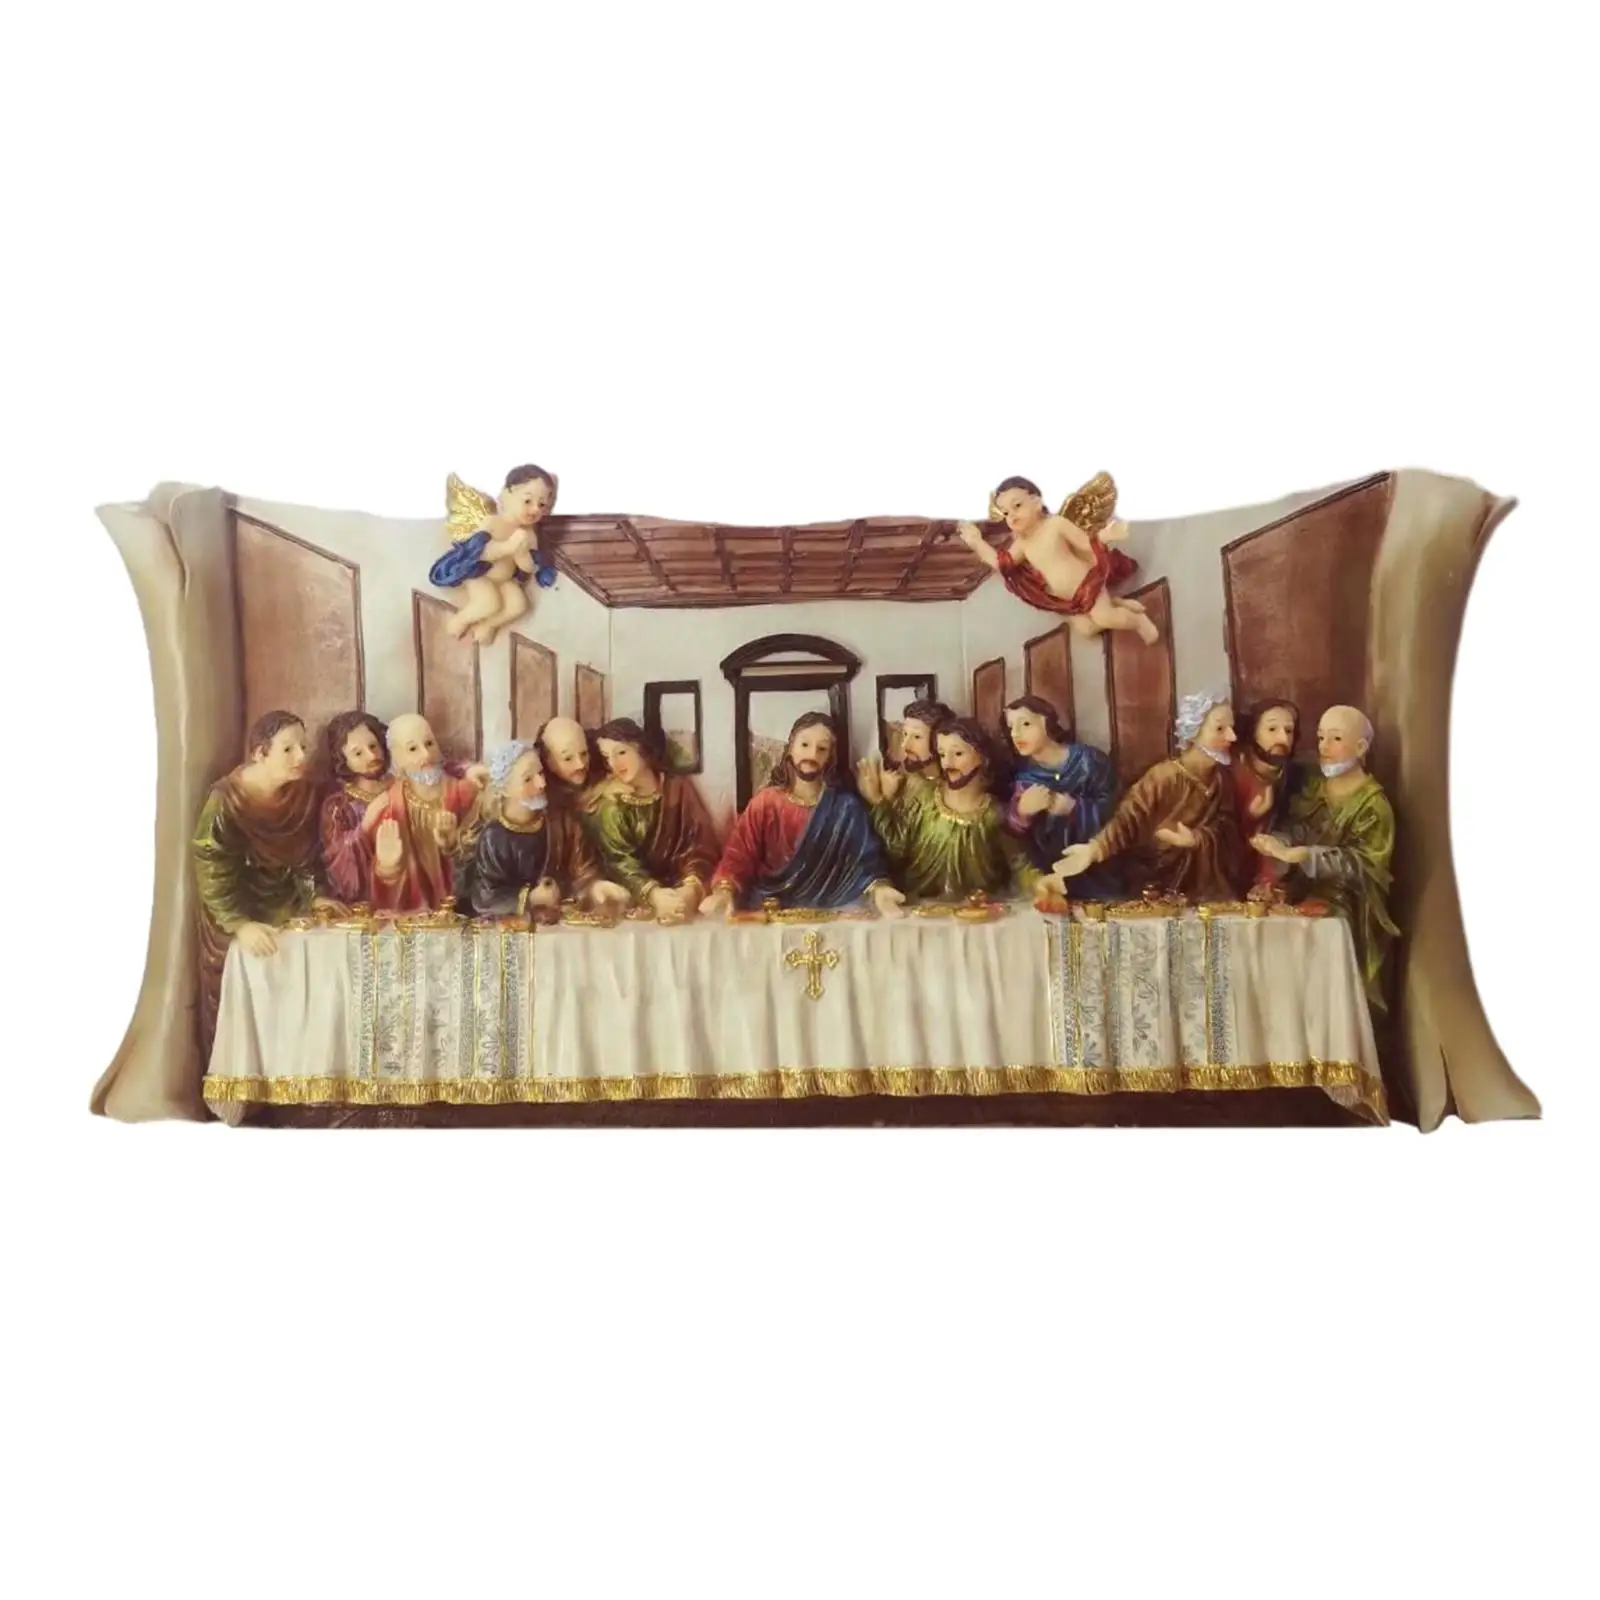 Resin Last Supper Sculpture Statue Crafts Modern Artwork Religious Statue for Living Room Office Bedroom Collection Gifts Decor